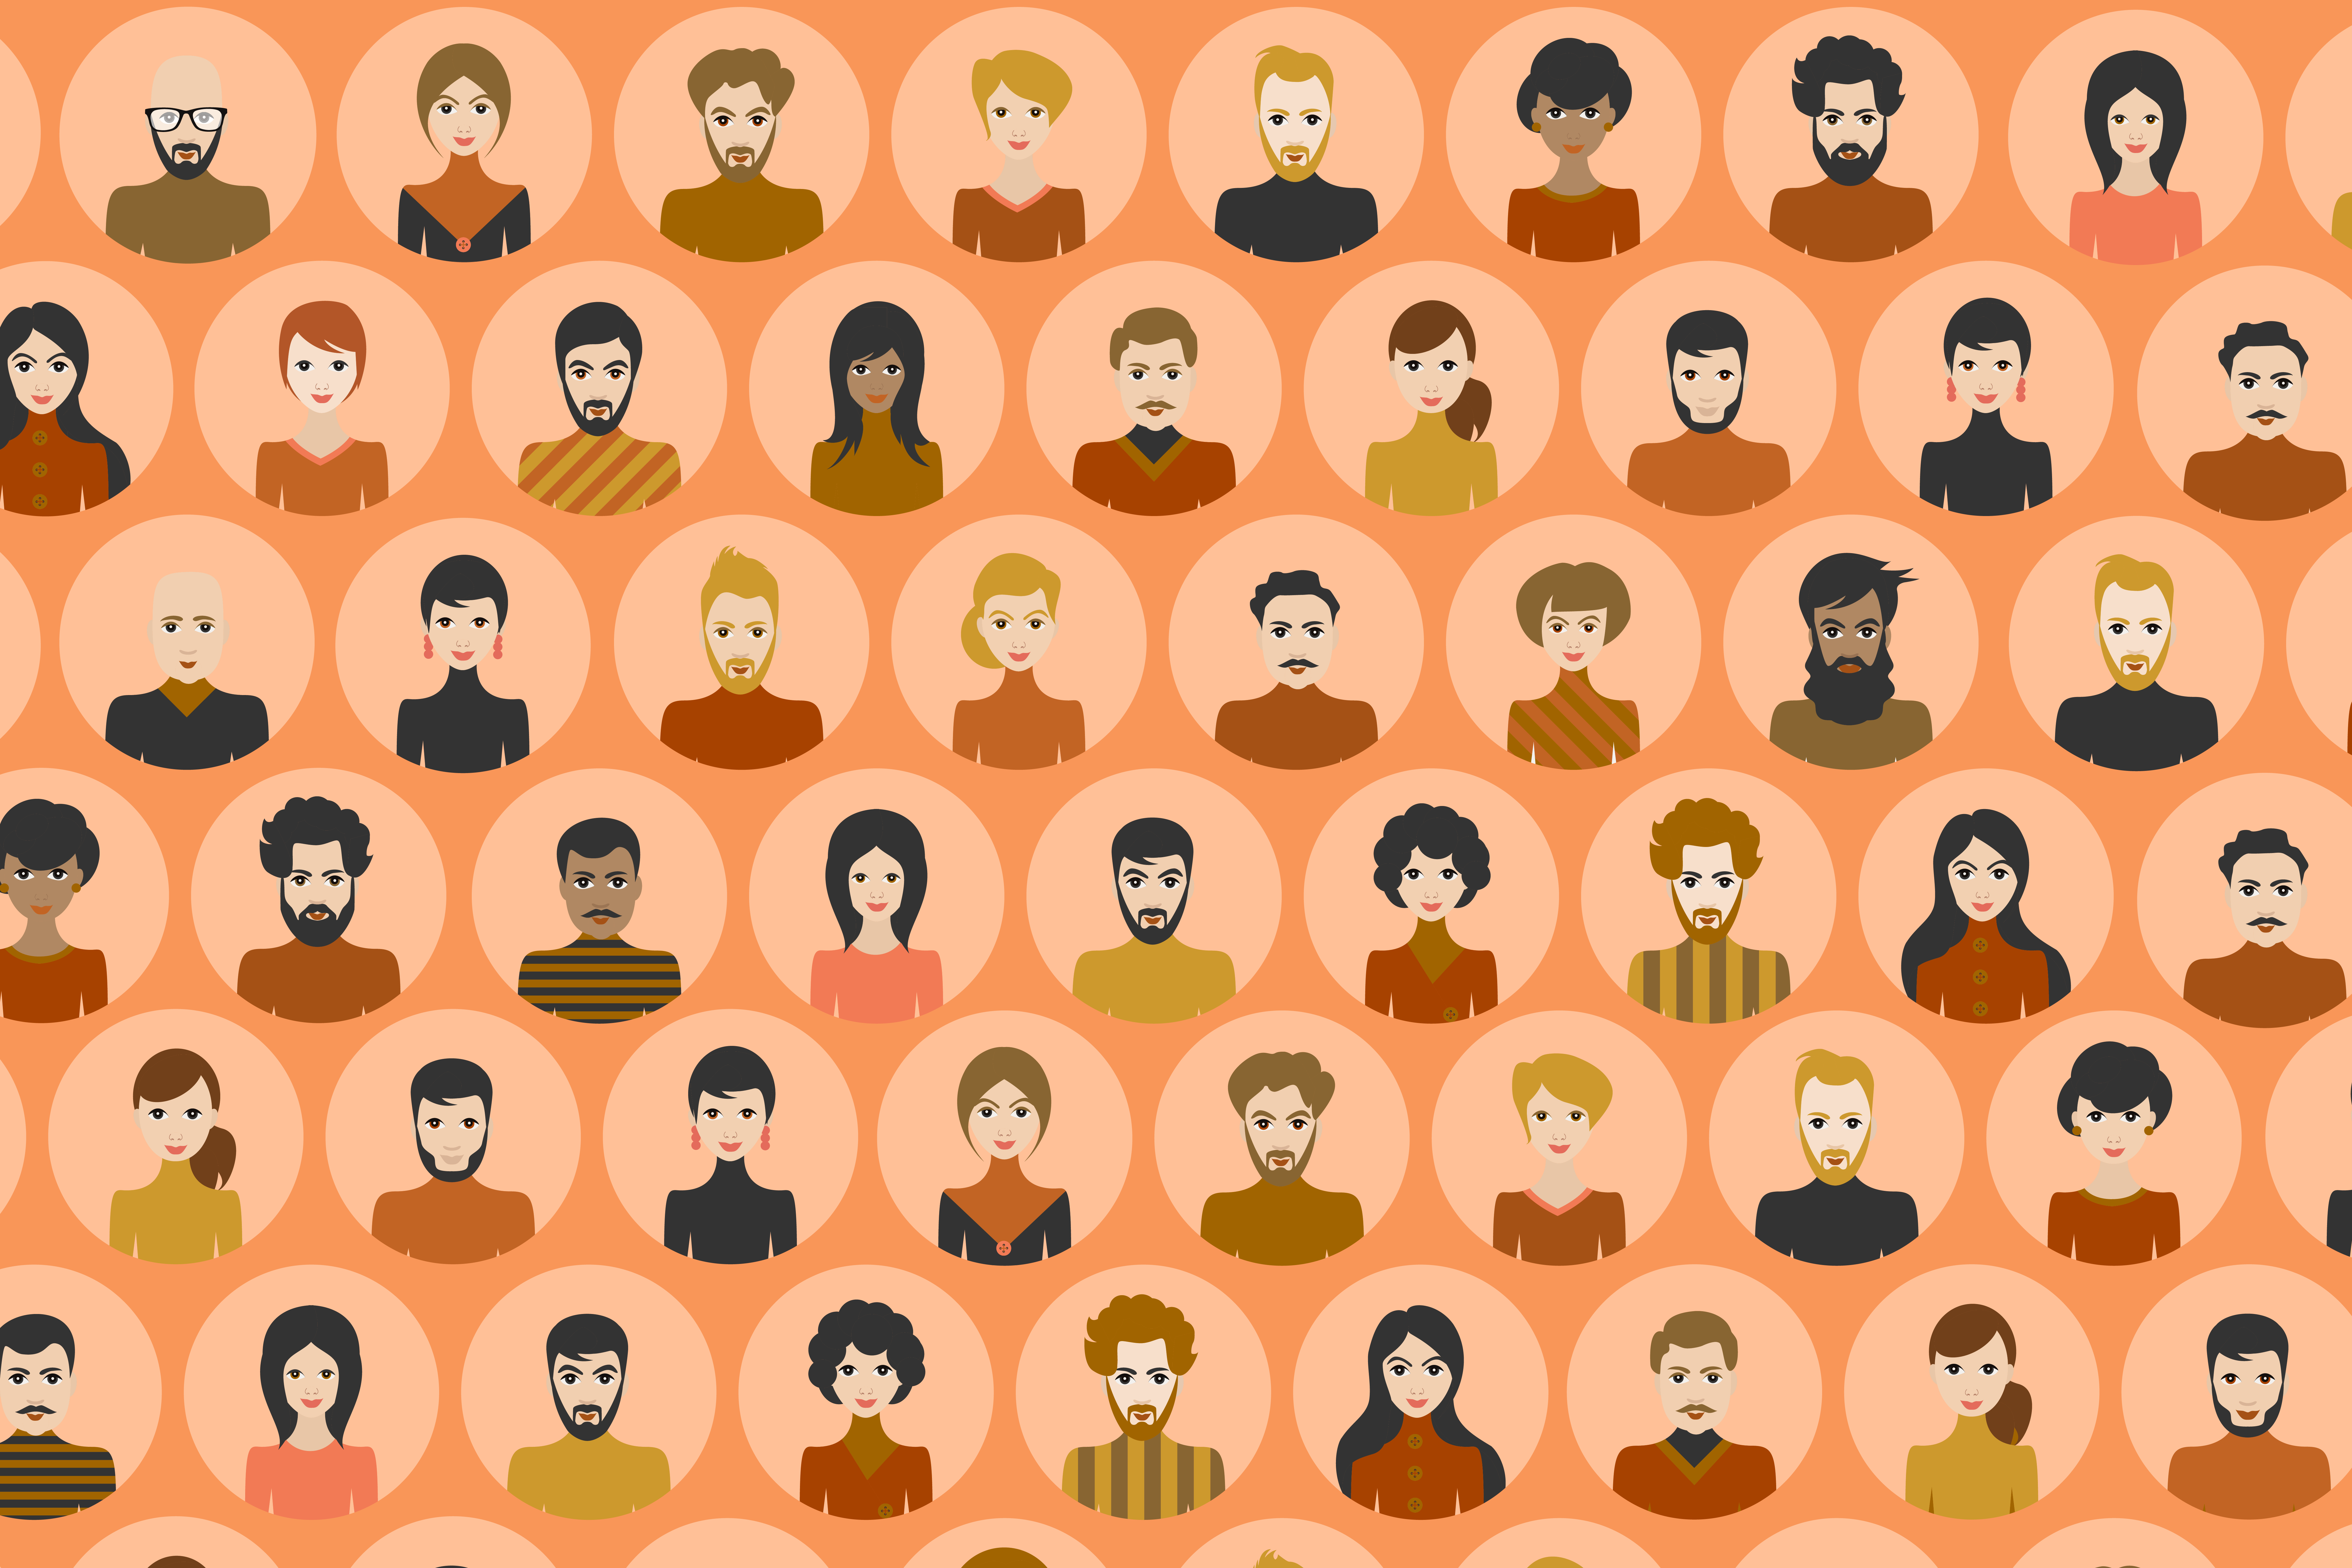 A blog featuring a pattern consisting of various illustrated, diverse faces of people against a peach background.